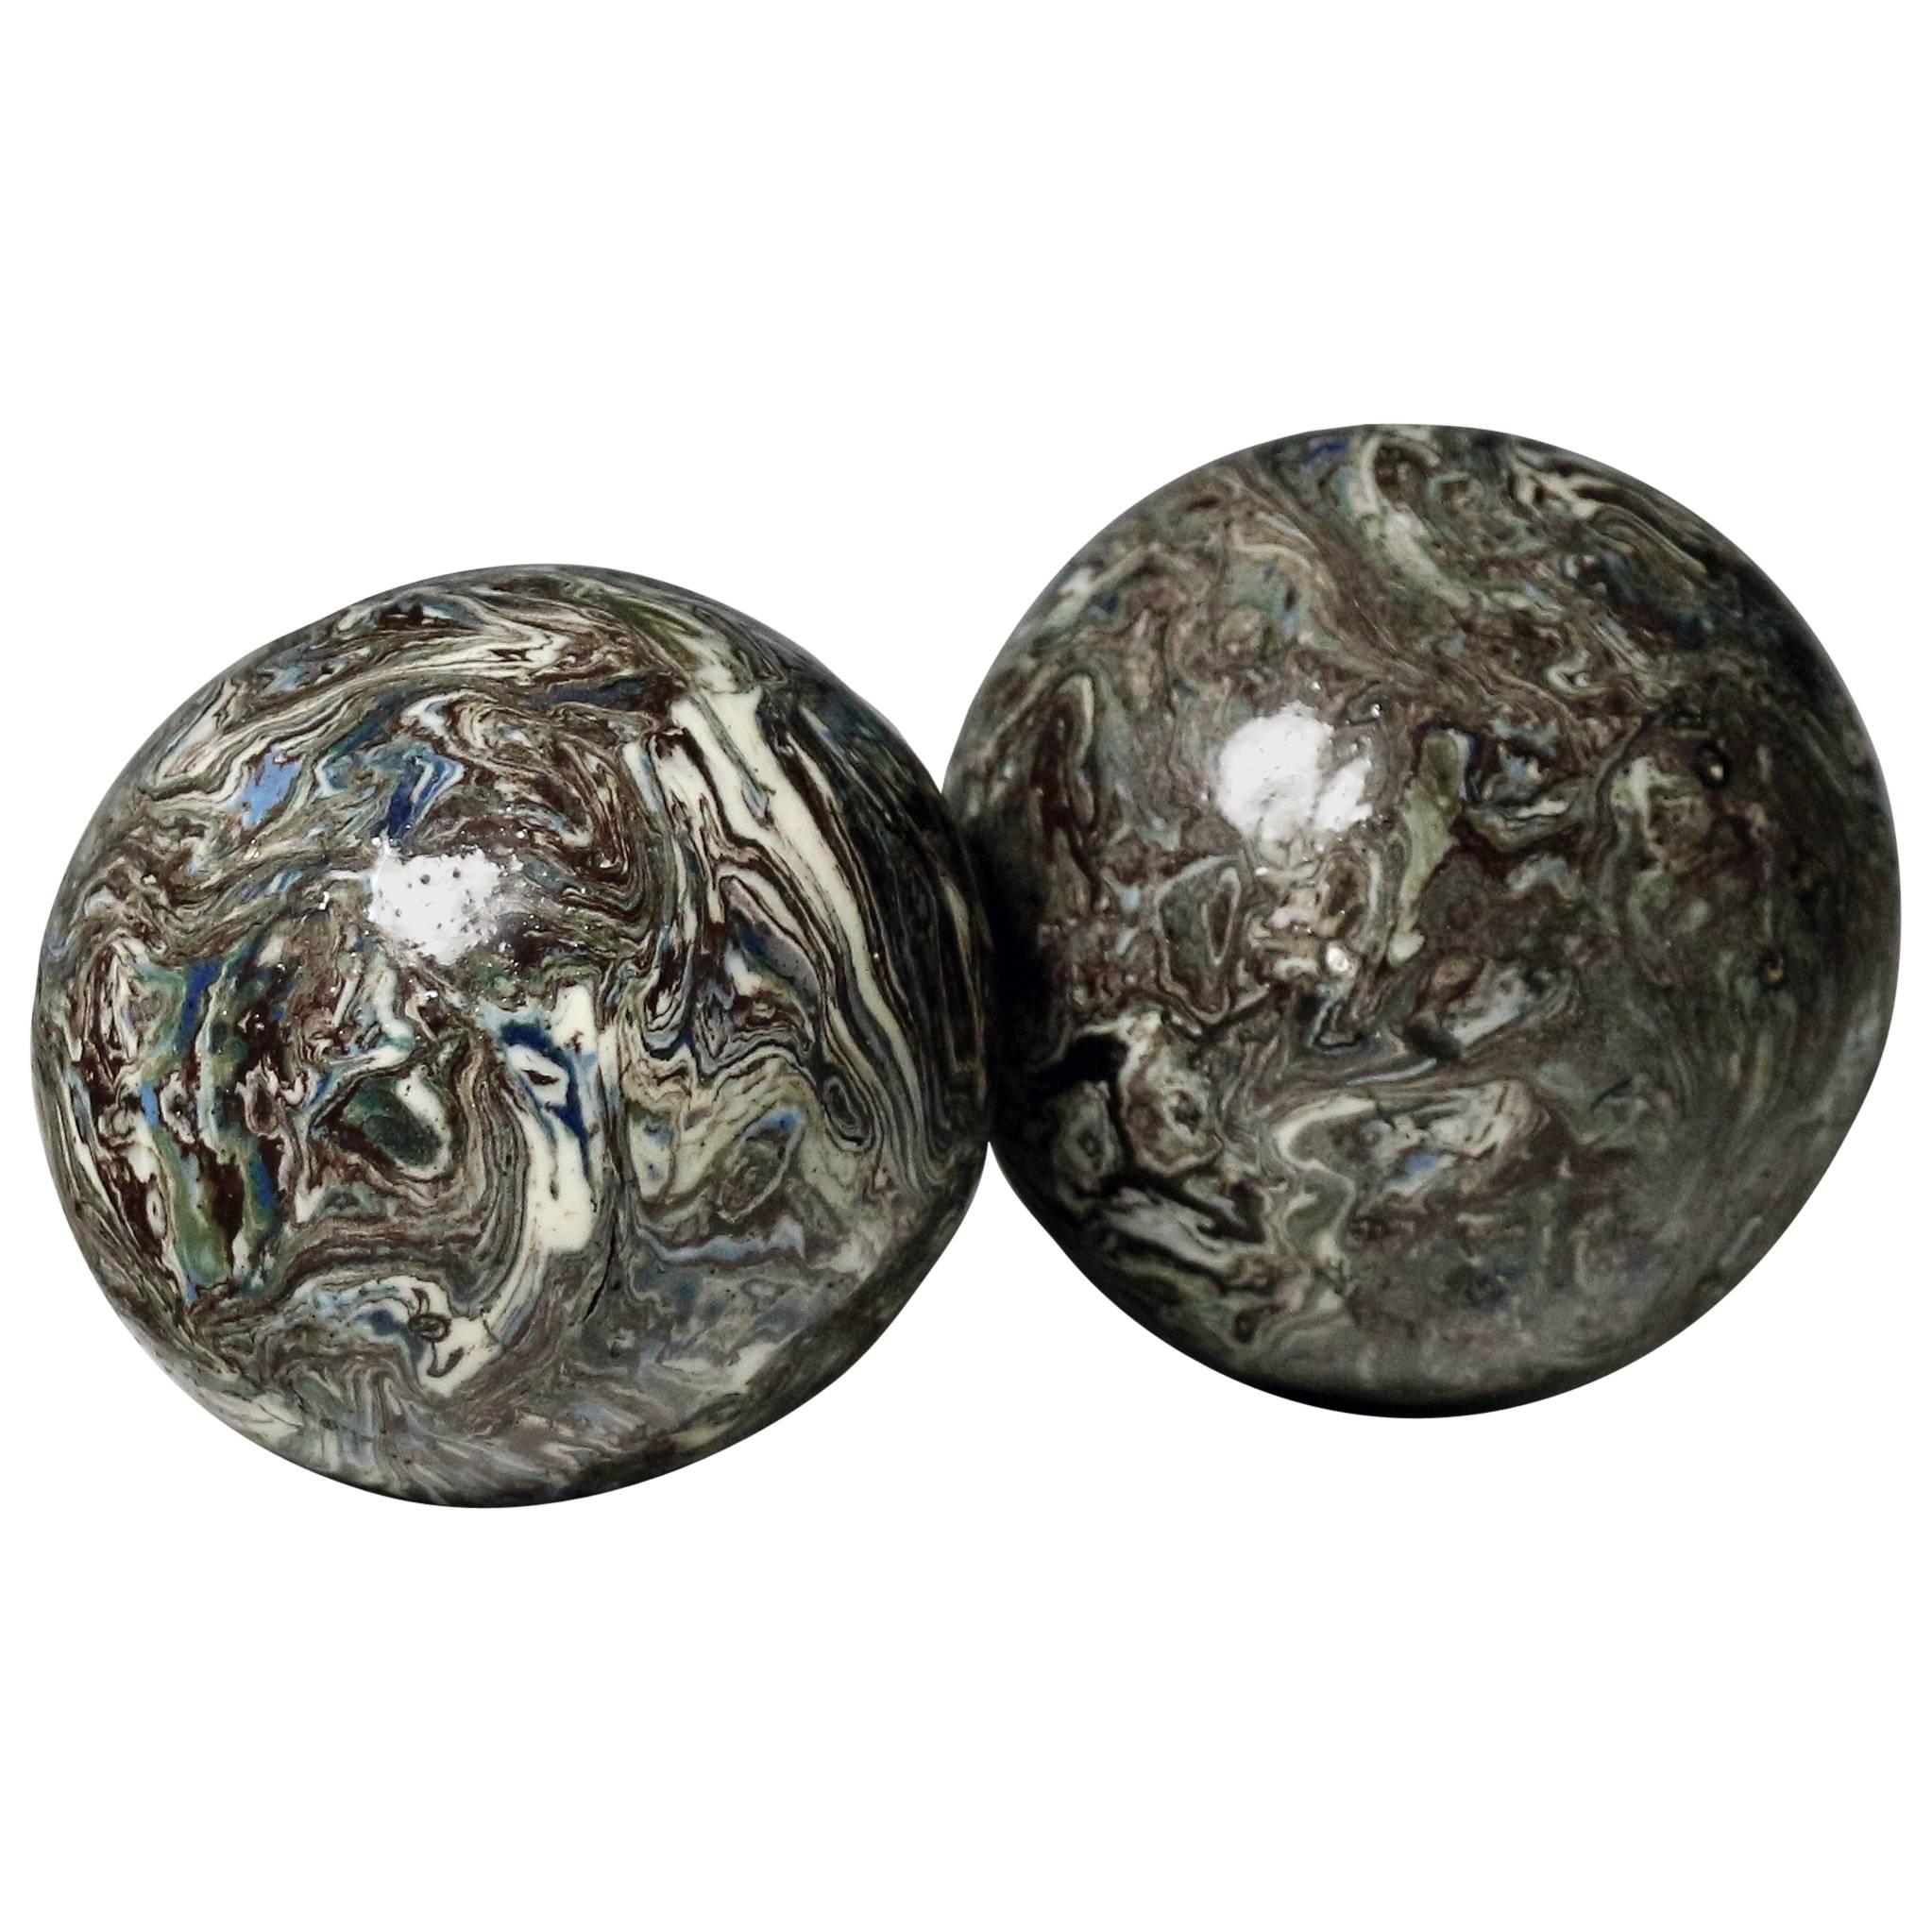 Two Variegated Agateware Pottery Balls 18th century. For Sale